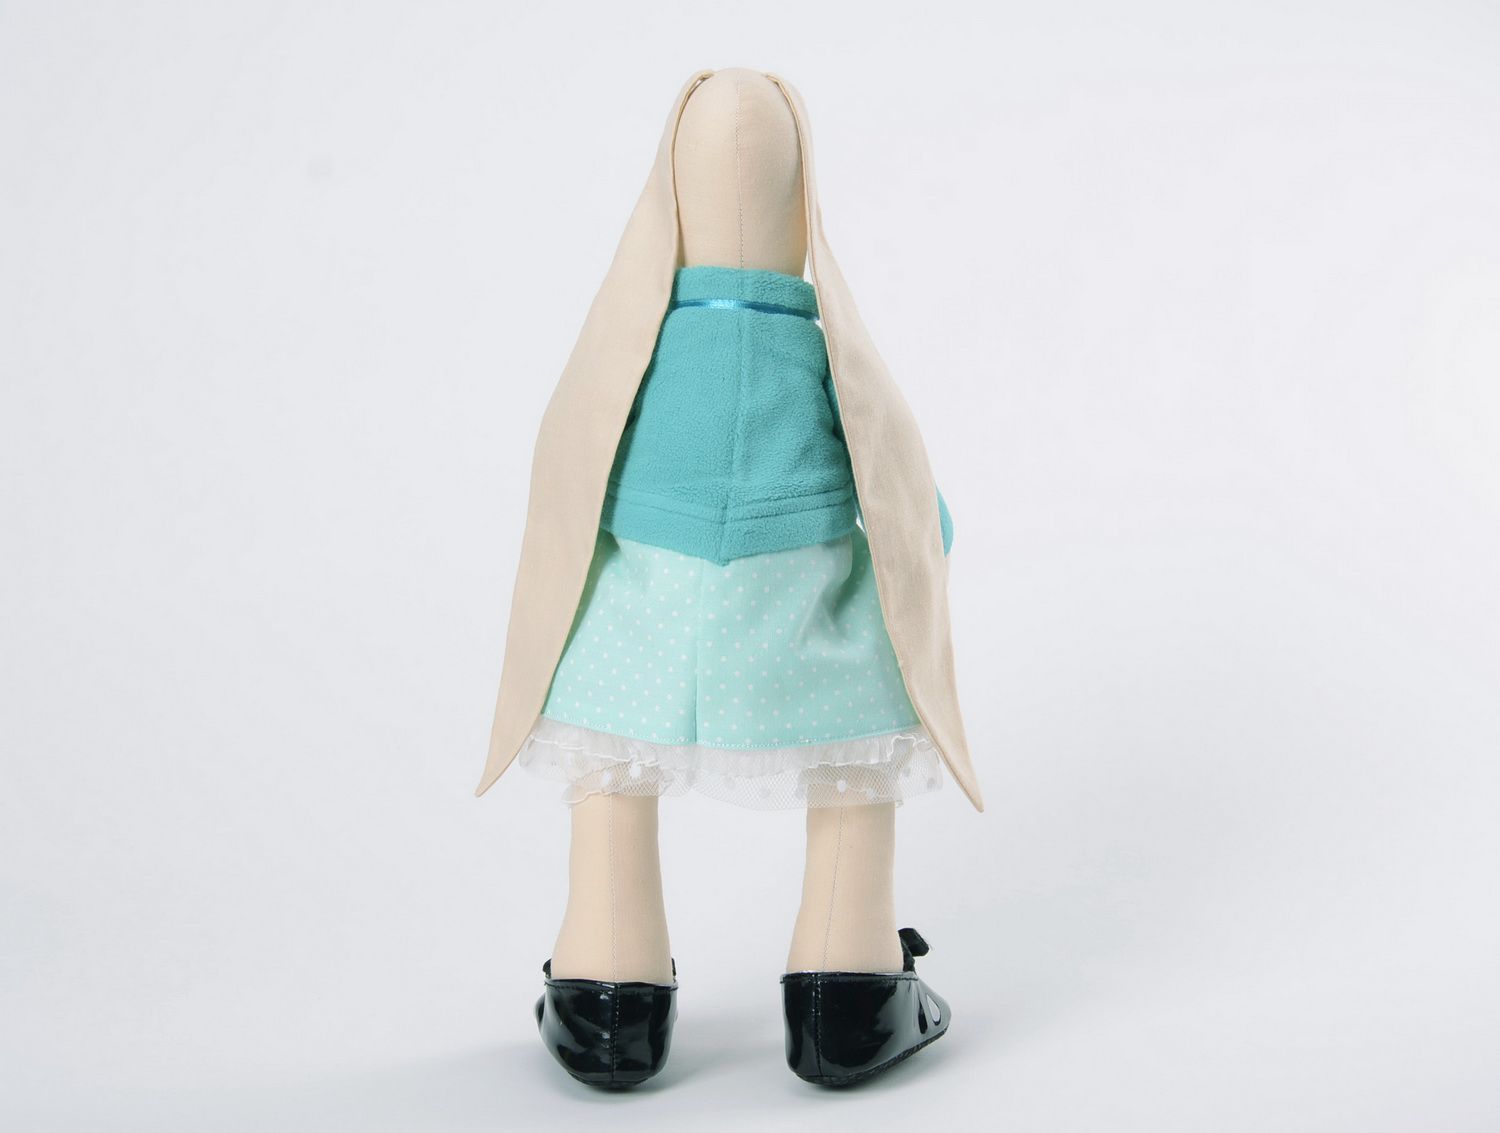 Tilde toy Hare in a dress photo 4